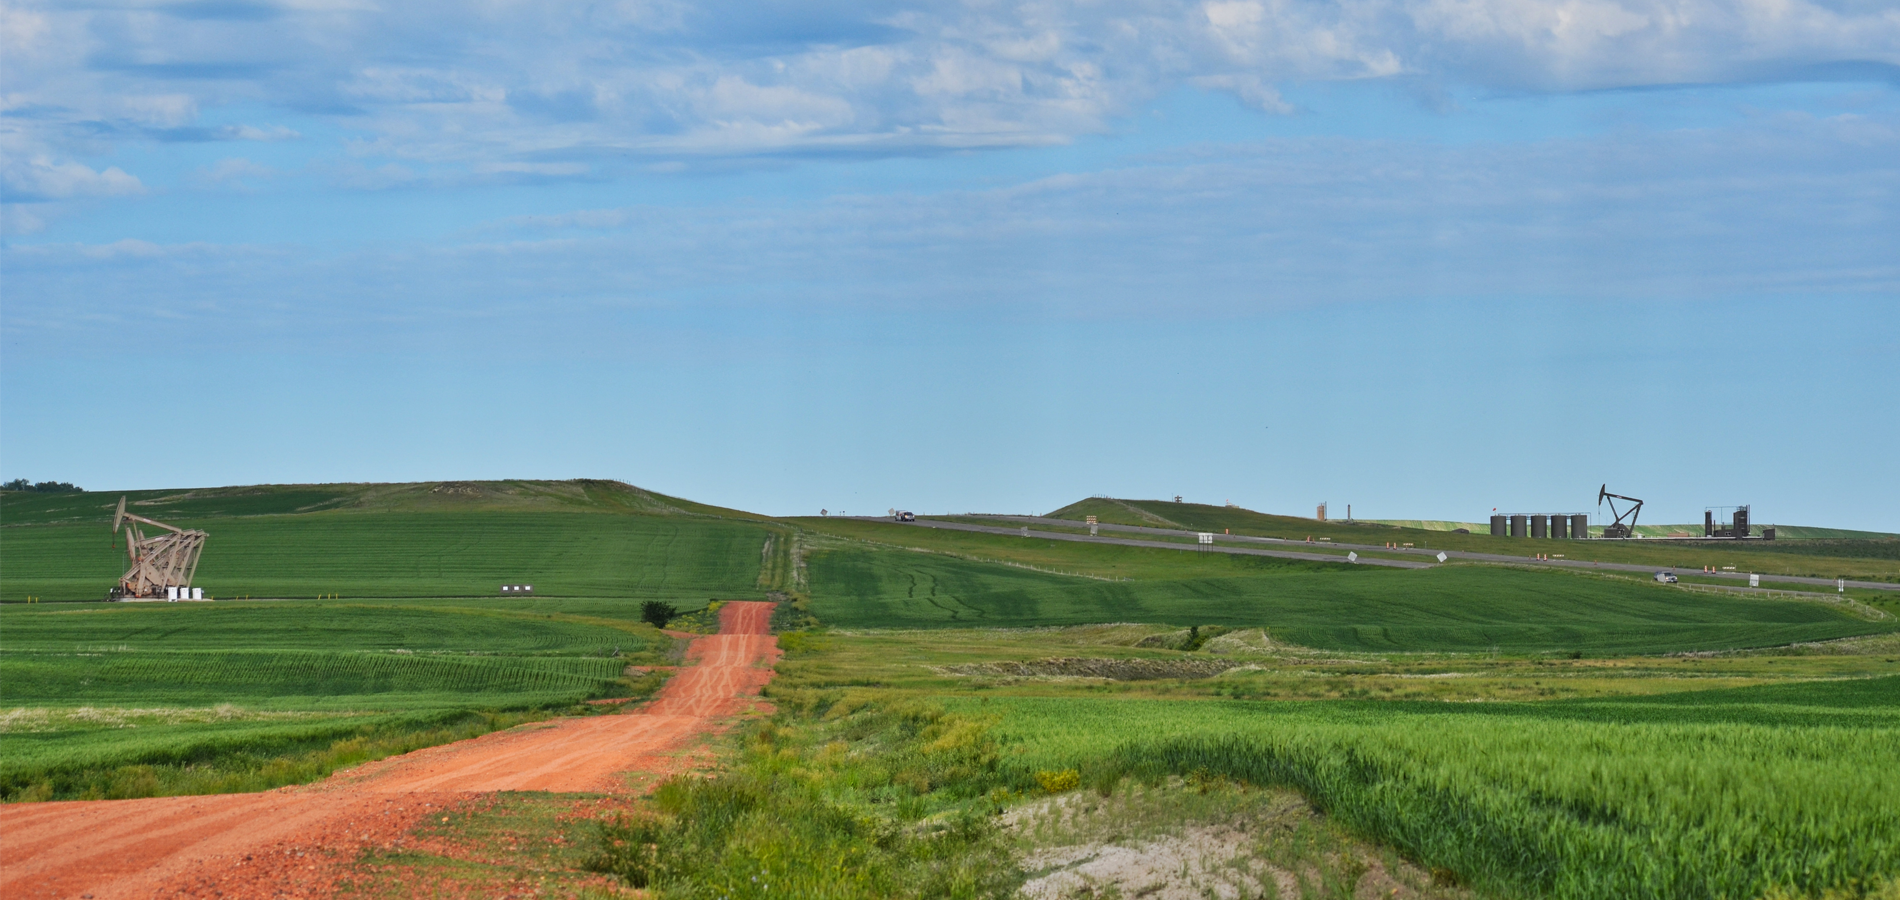 A gravel road cuts through fields with oil wells in North Dakota